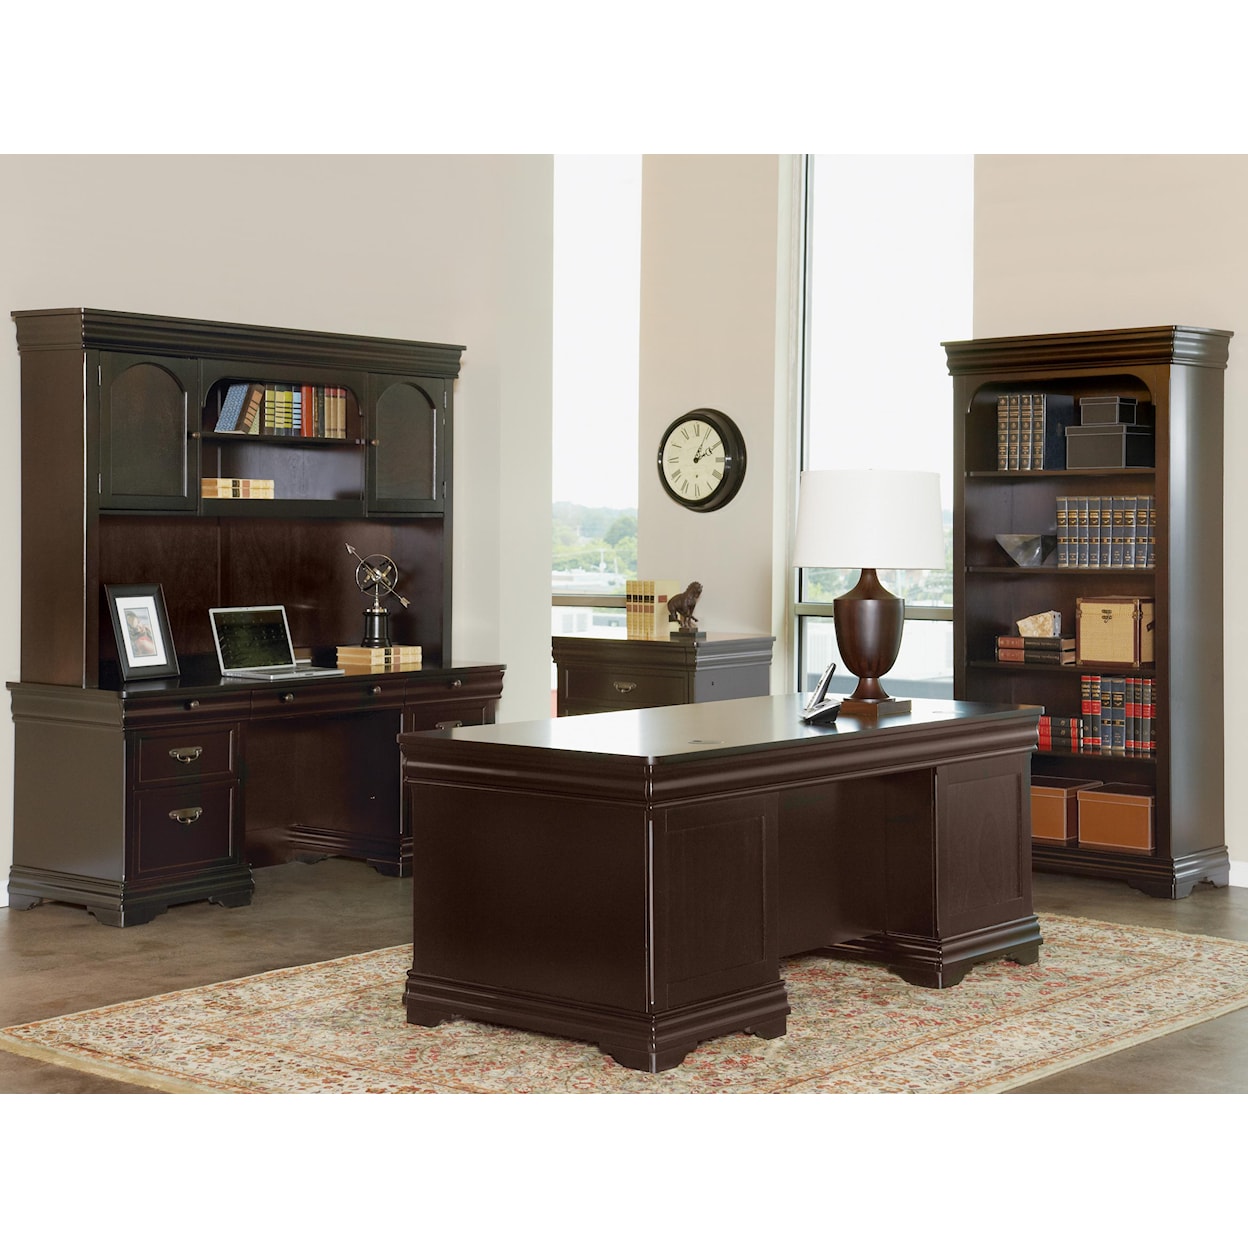 Martin Home Furnishings Beaumont Credenza